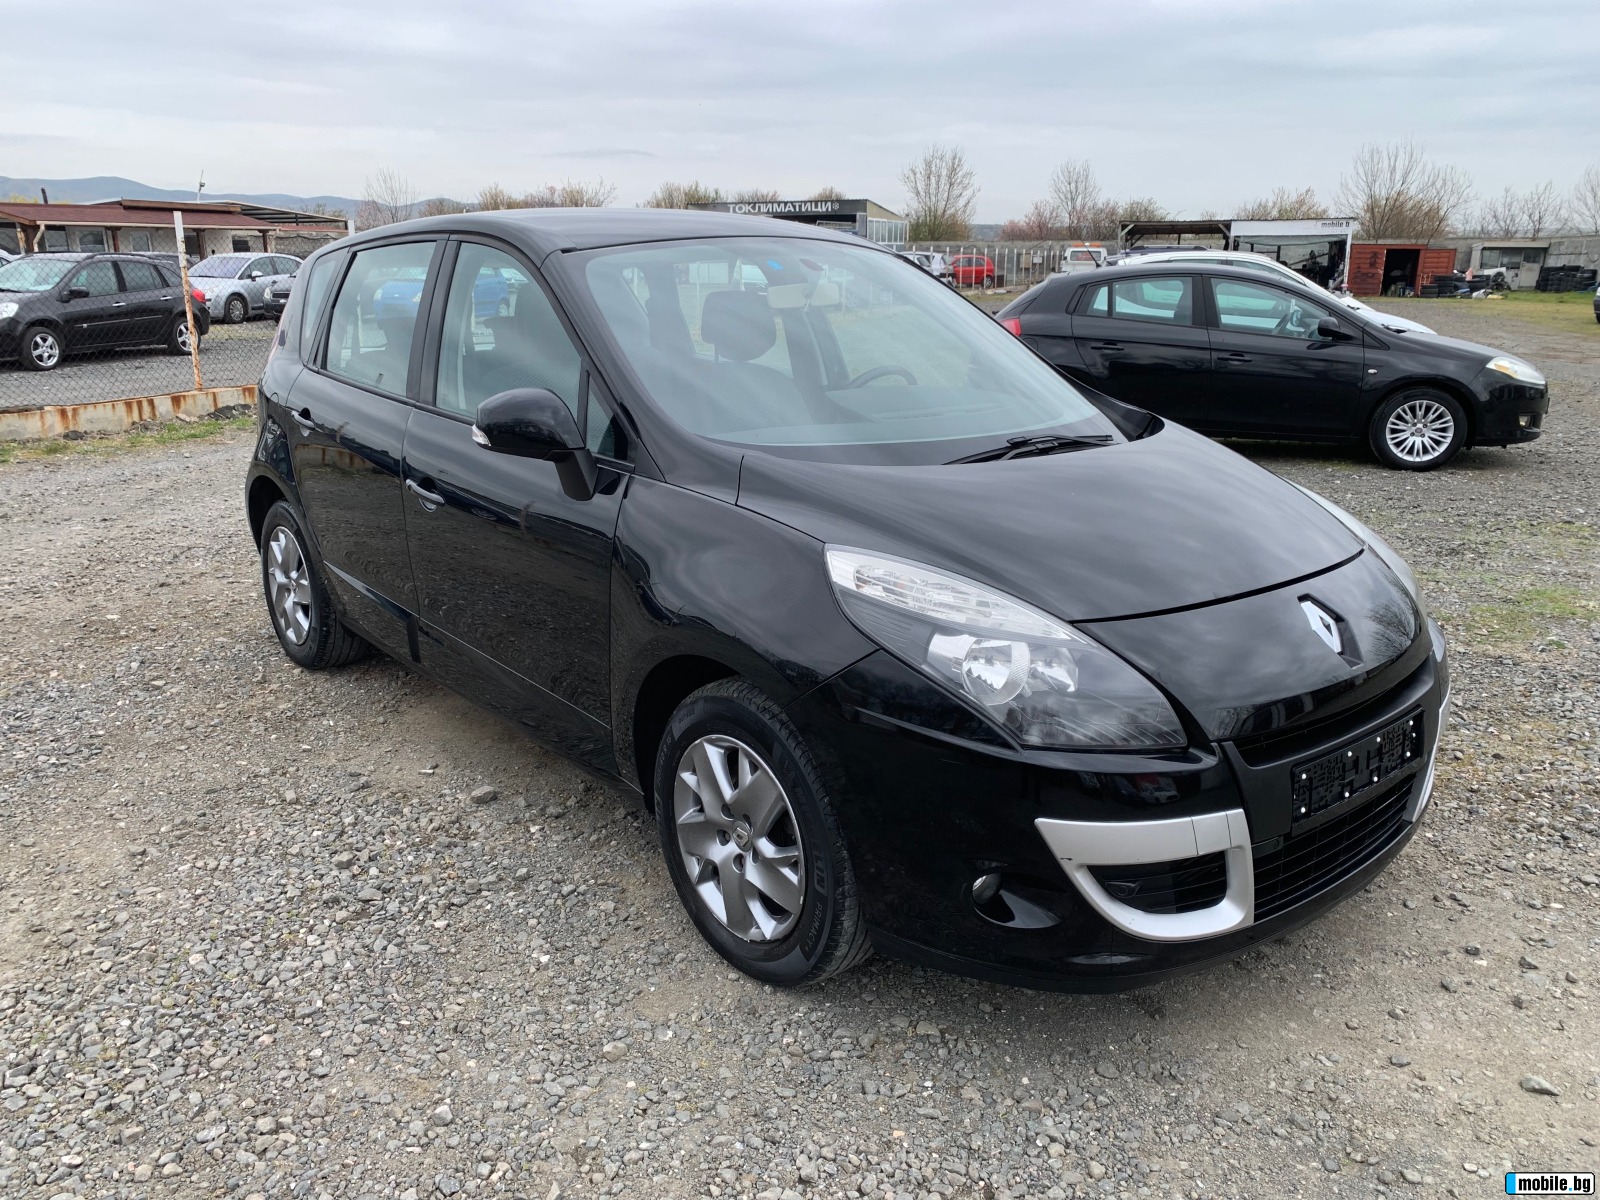 Renault Scenic III X-MOD Facelift  DYNAMIQUE 1.5dCi(110)EURO 5A   | Mobile.bg   2